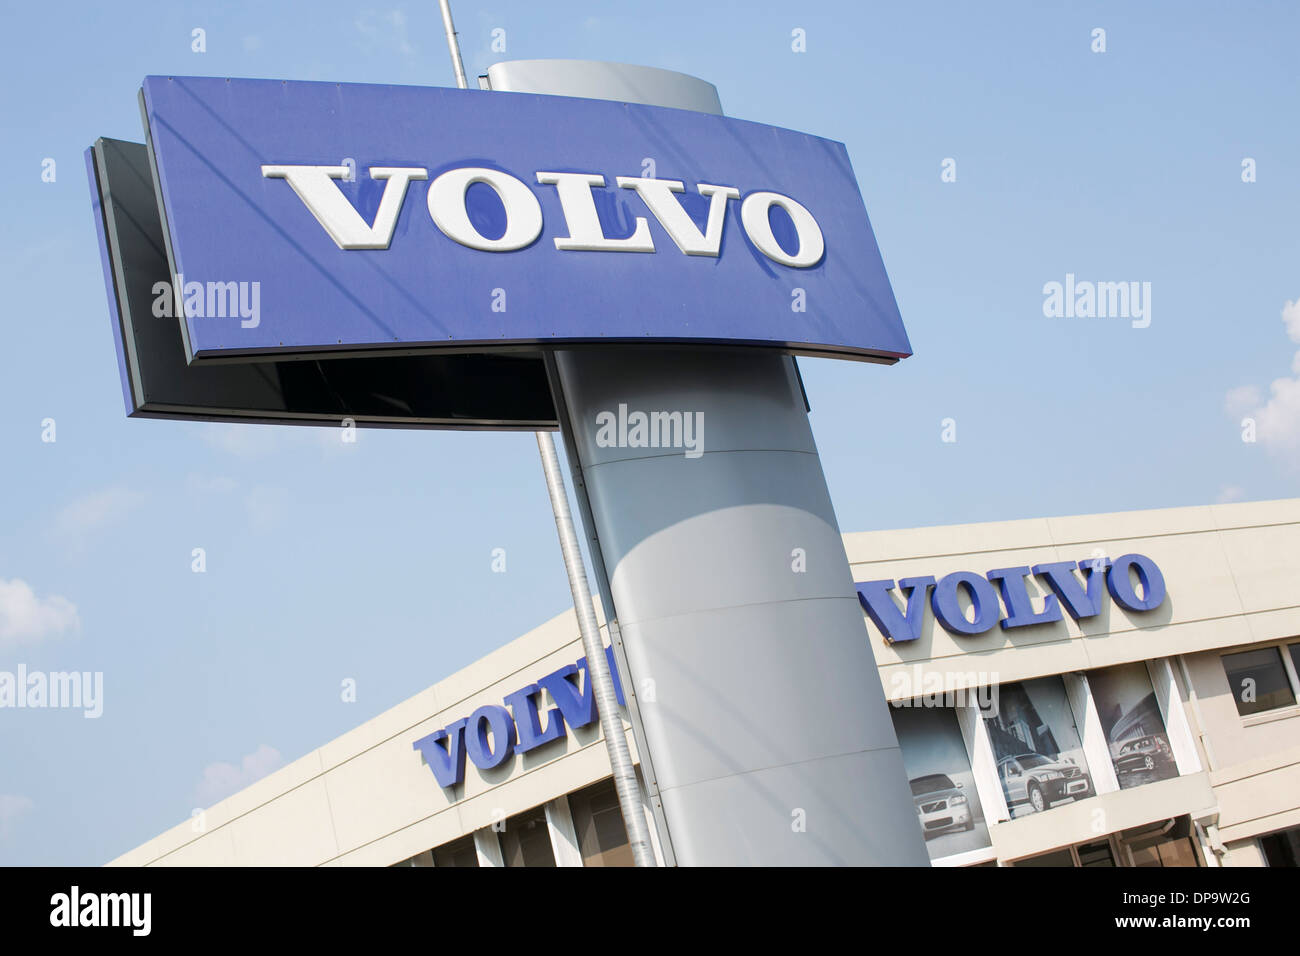 A Volvo dealer lot in suburban Maryland.  Stock Photo